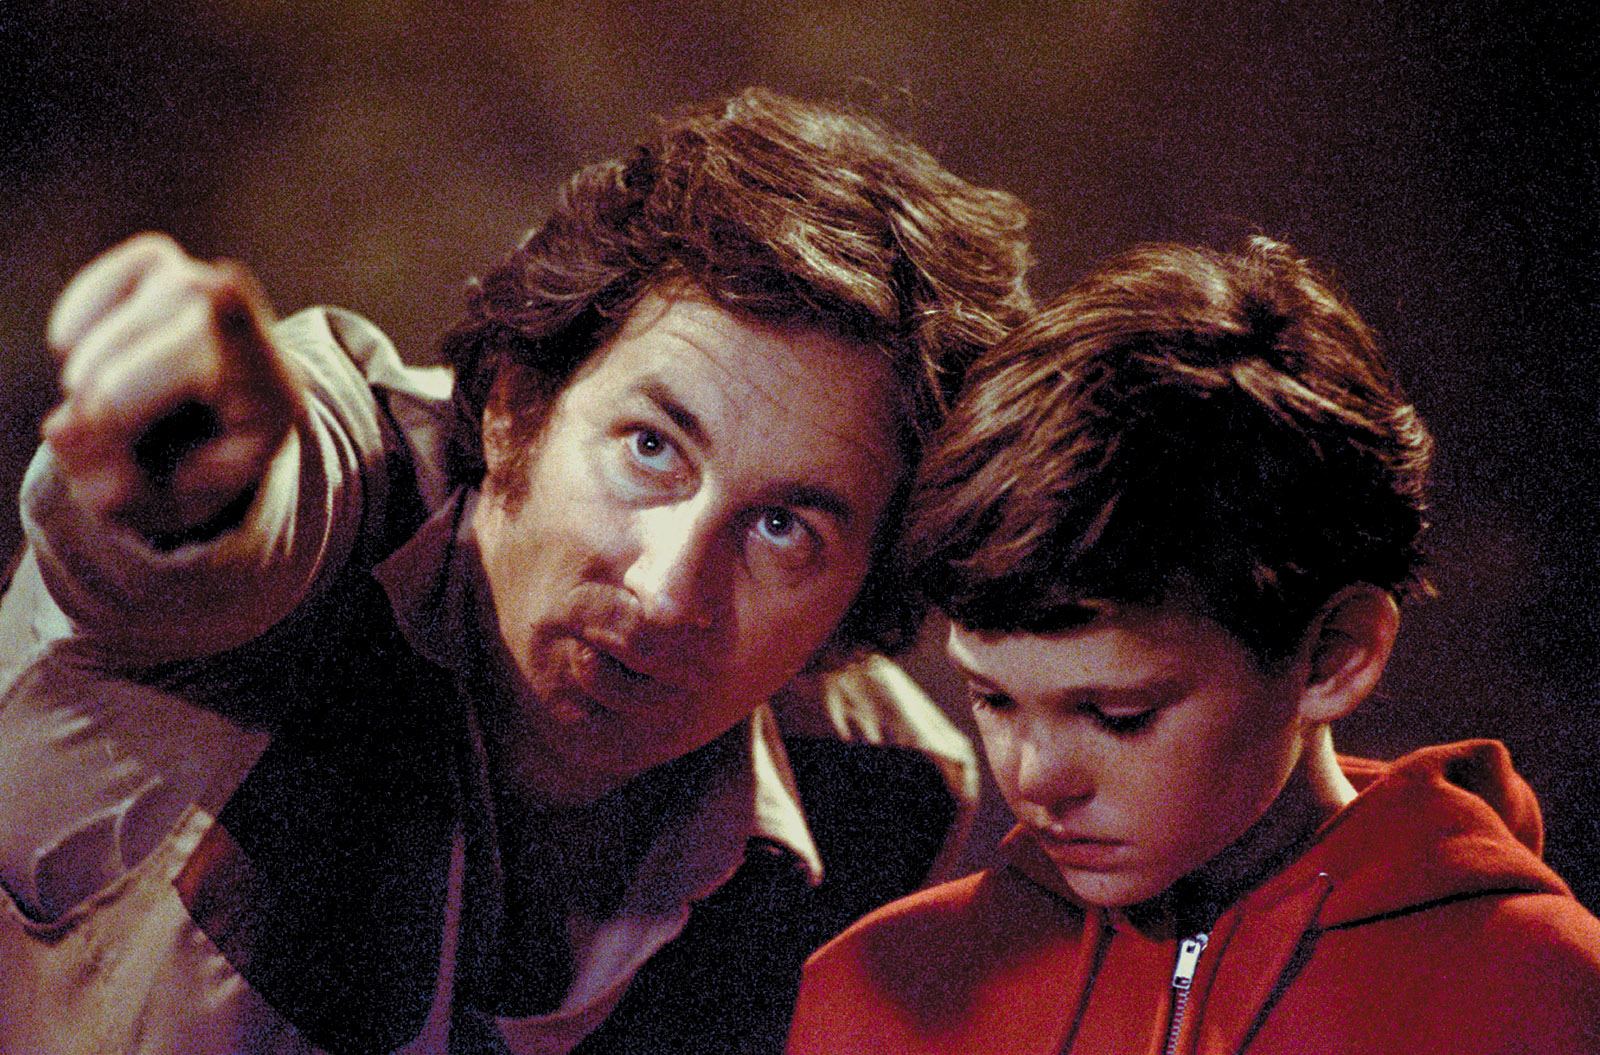 Steven Spielberg and Henry Thomas on the set of E.T., 1982